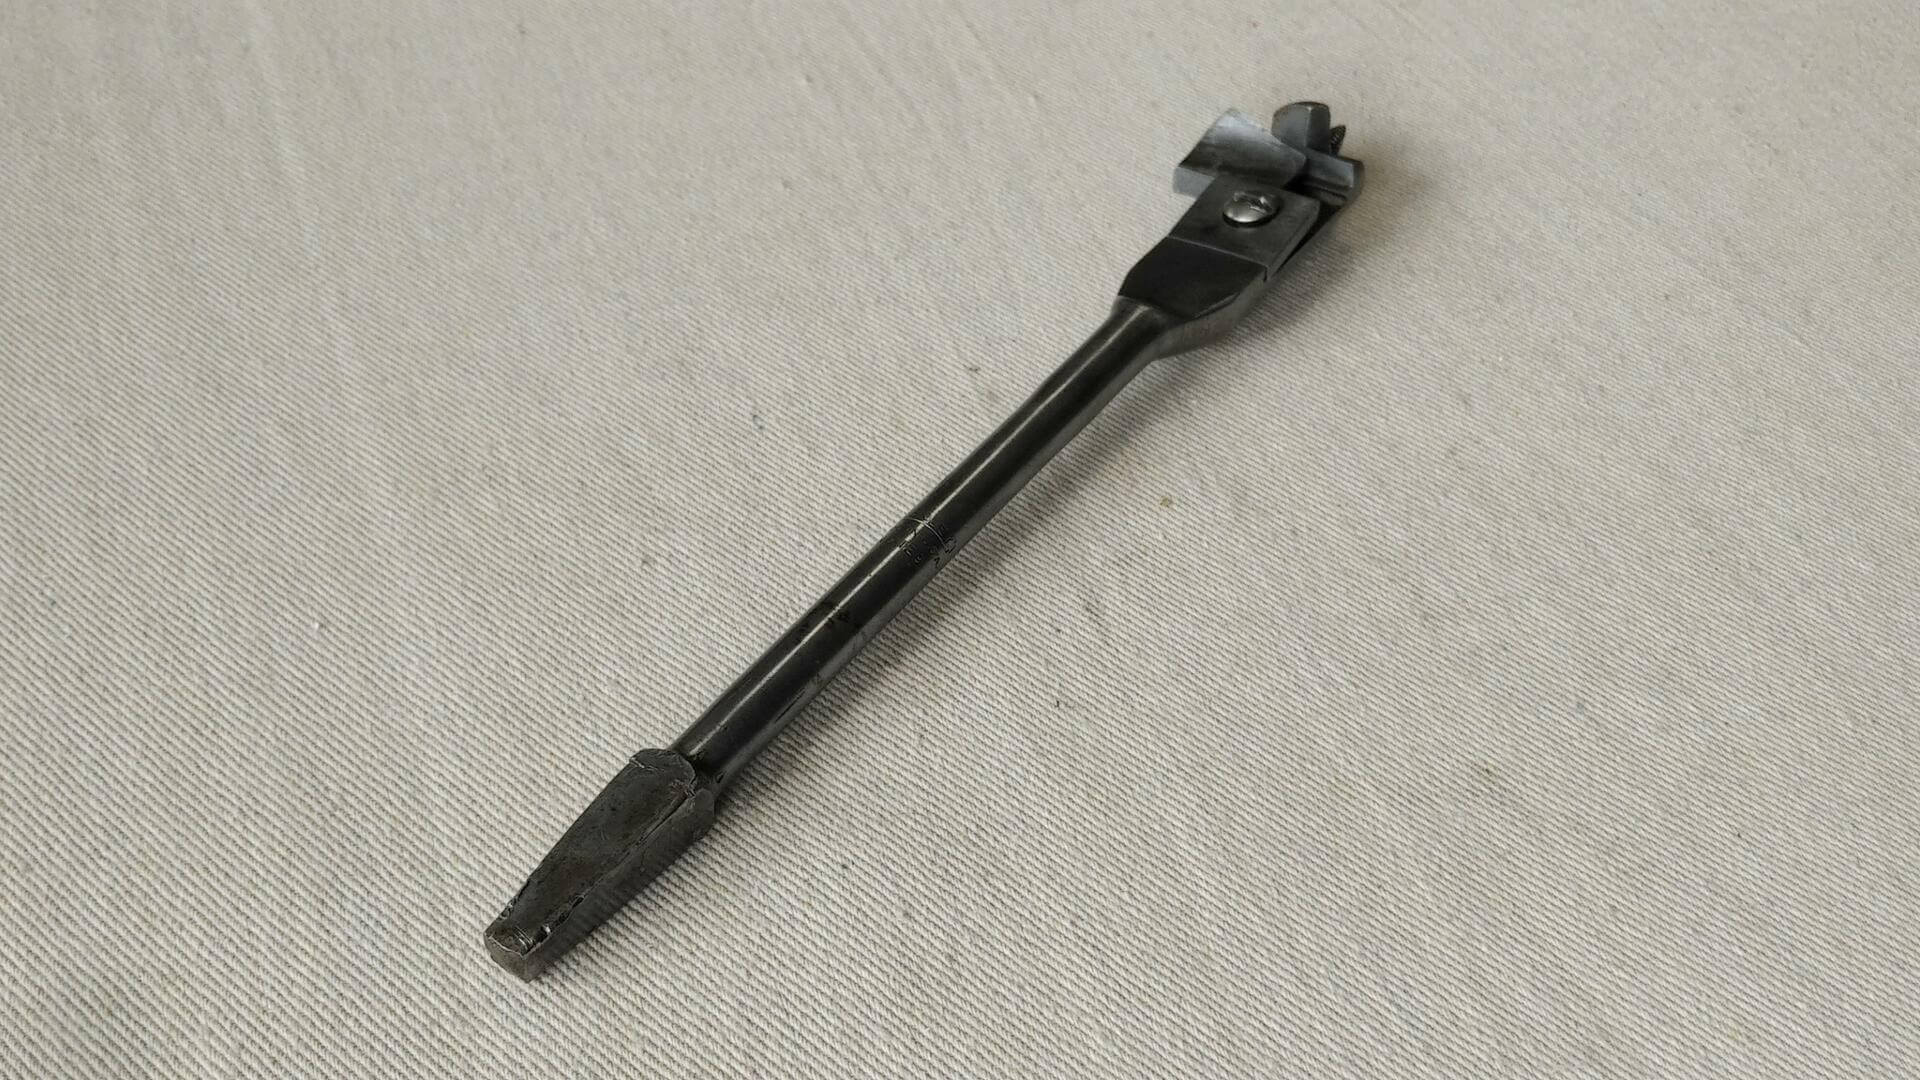 Antique Stanley micro-dial adjustable expansive boring drill bit No 129. Vintage made in USA collectible carpentry and woodworking cabinet maker hand tools